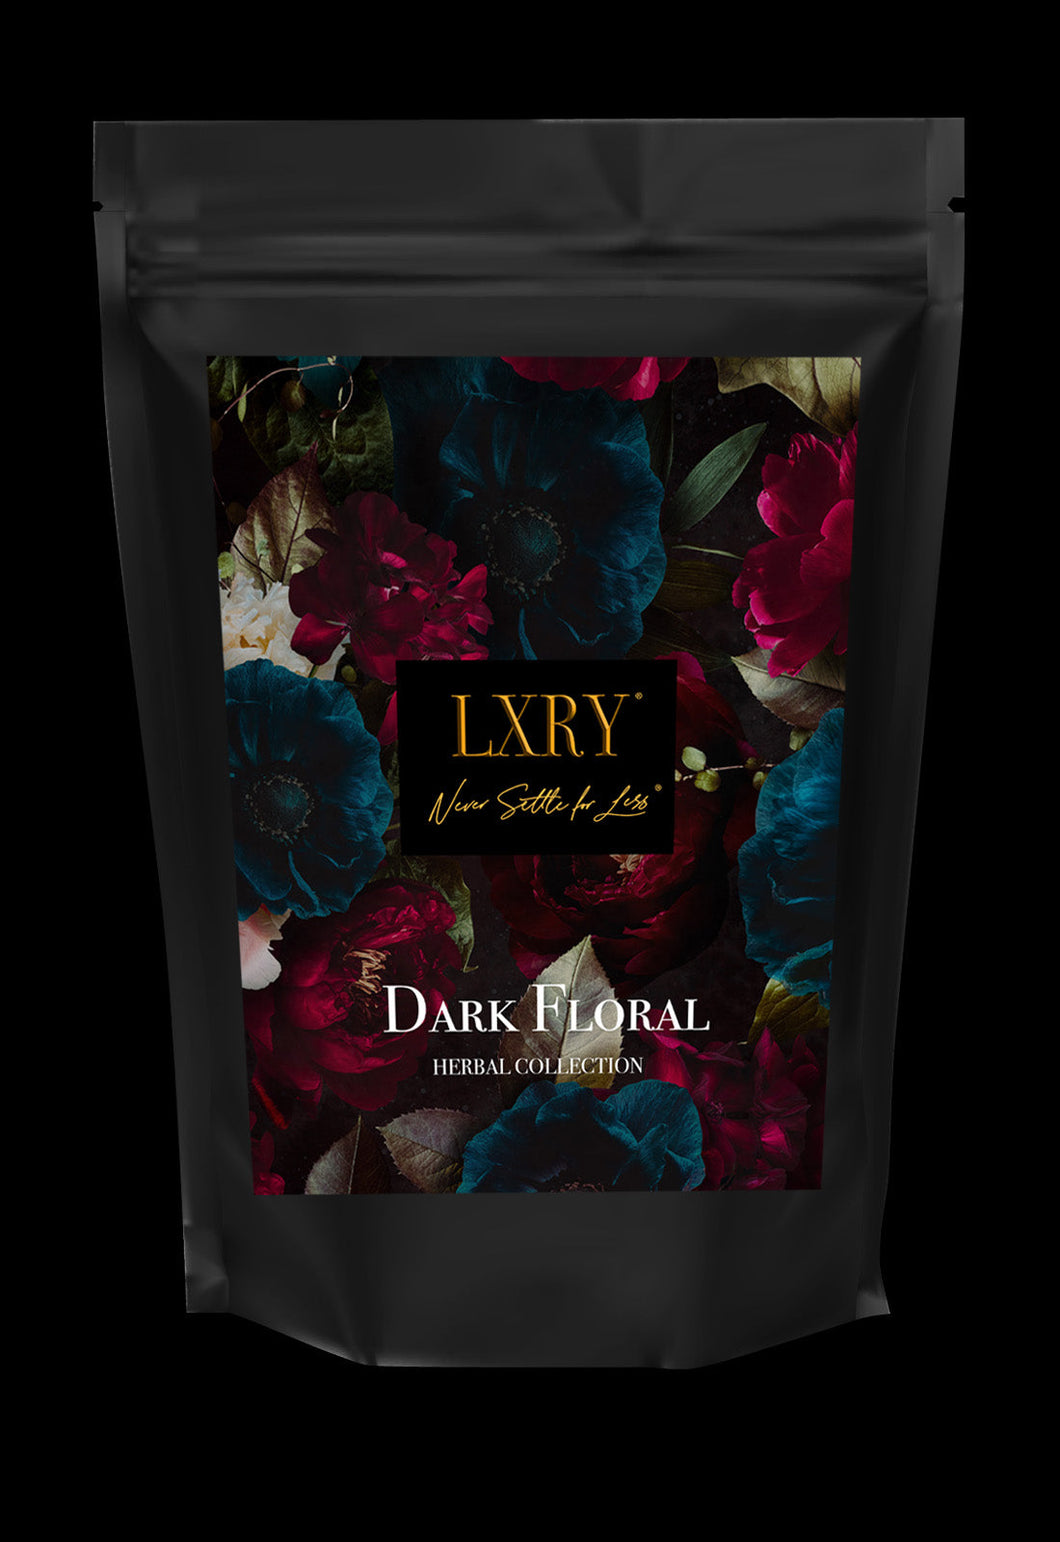 Dark Floral (Herbal Collection)